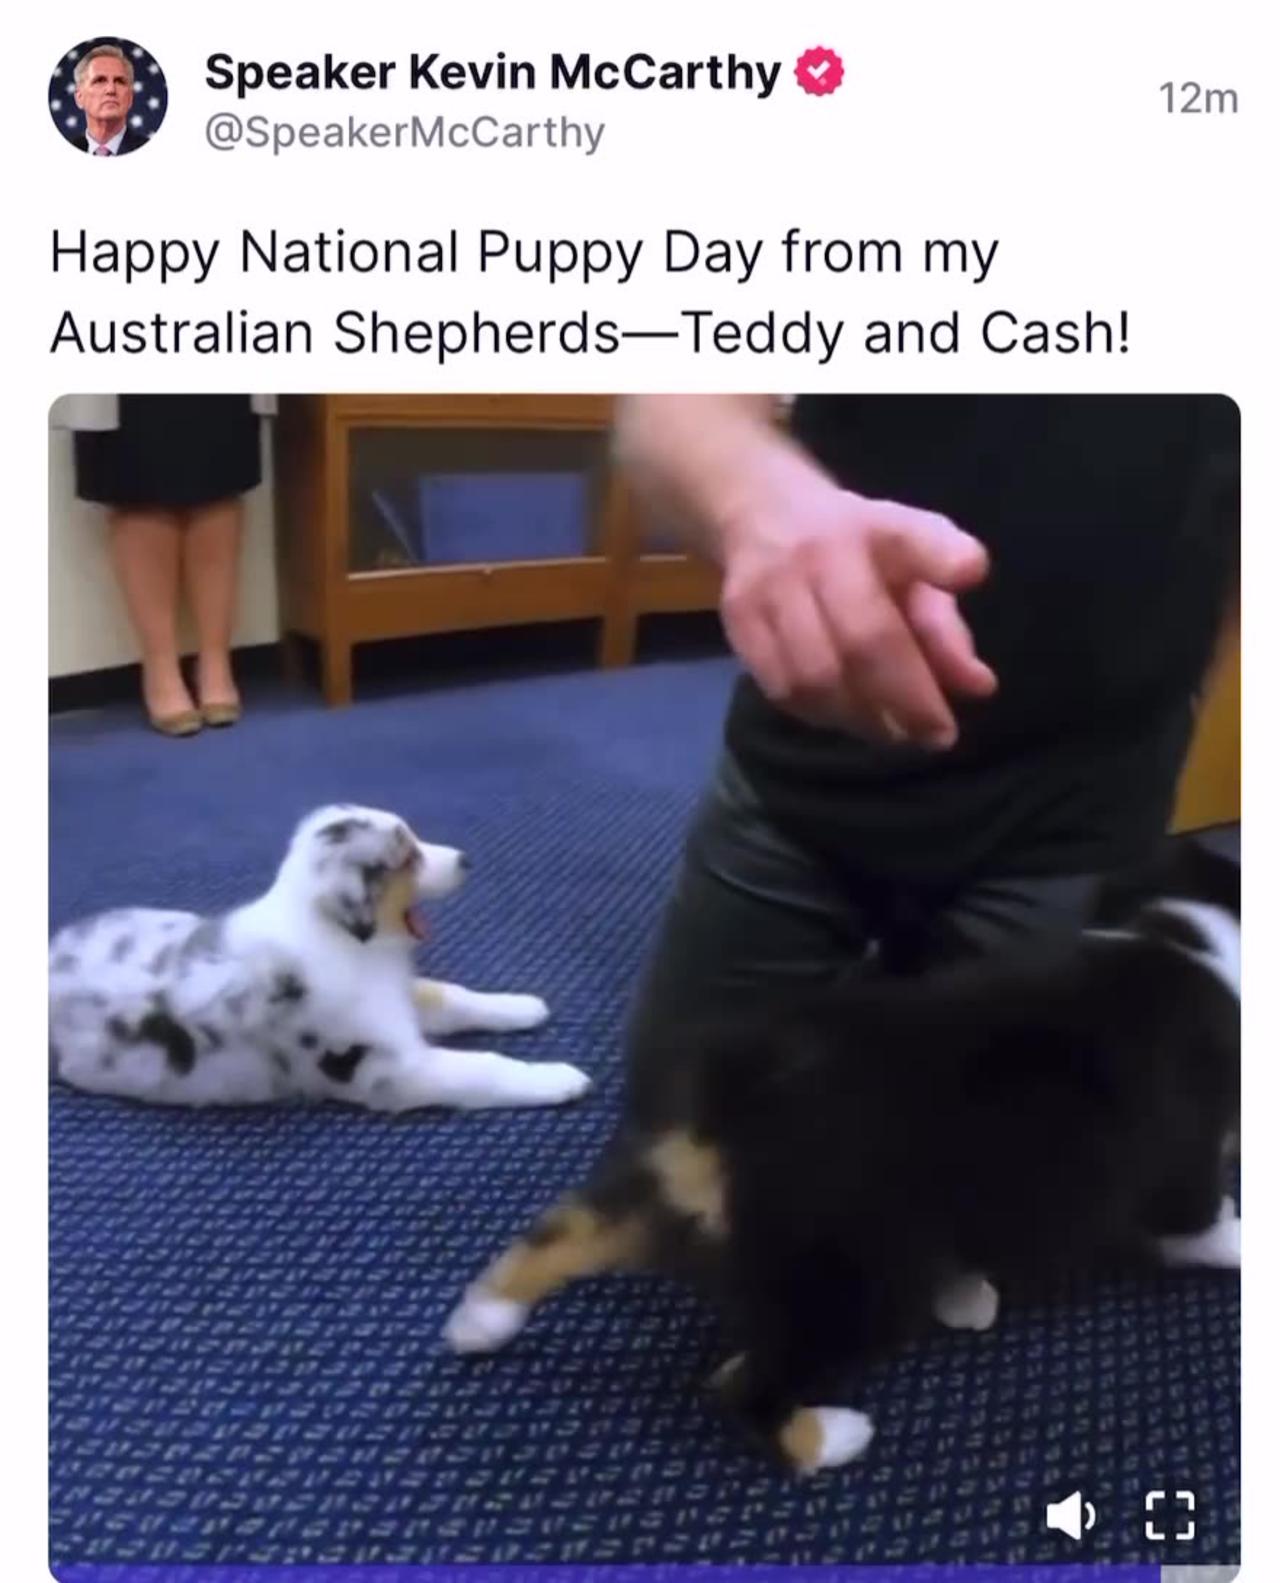 McCarthy: Happy National Puppy Day